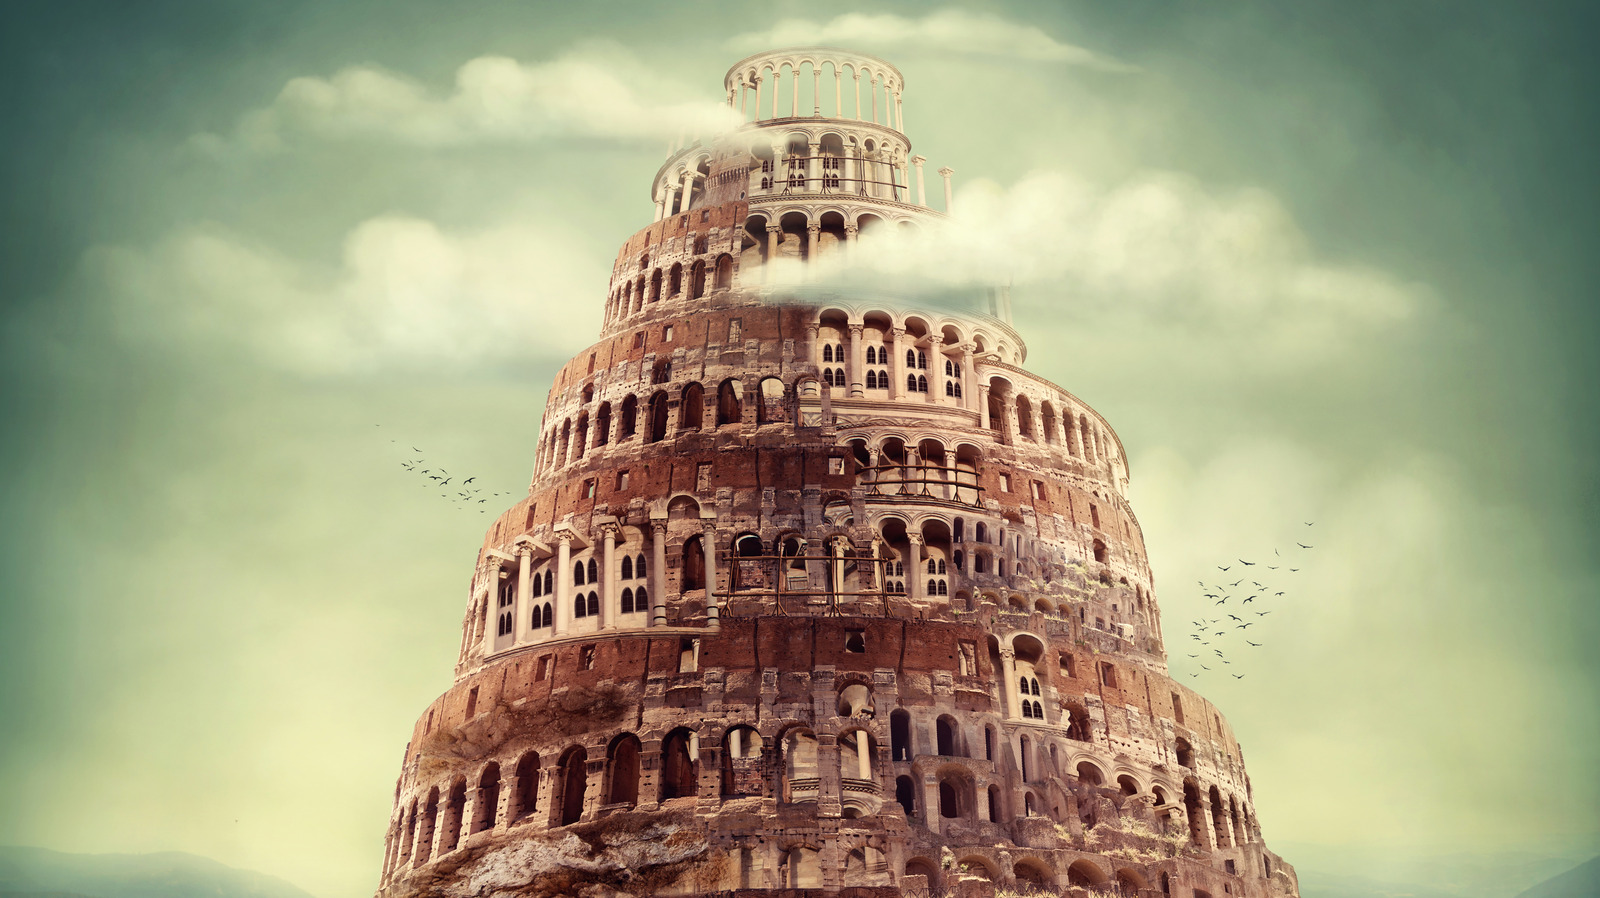 Did Our Languages Come From the “Tower of Babel”?